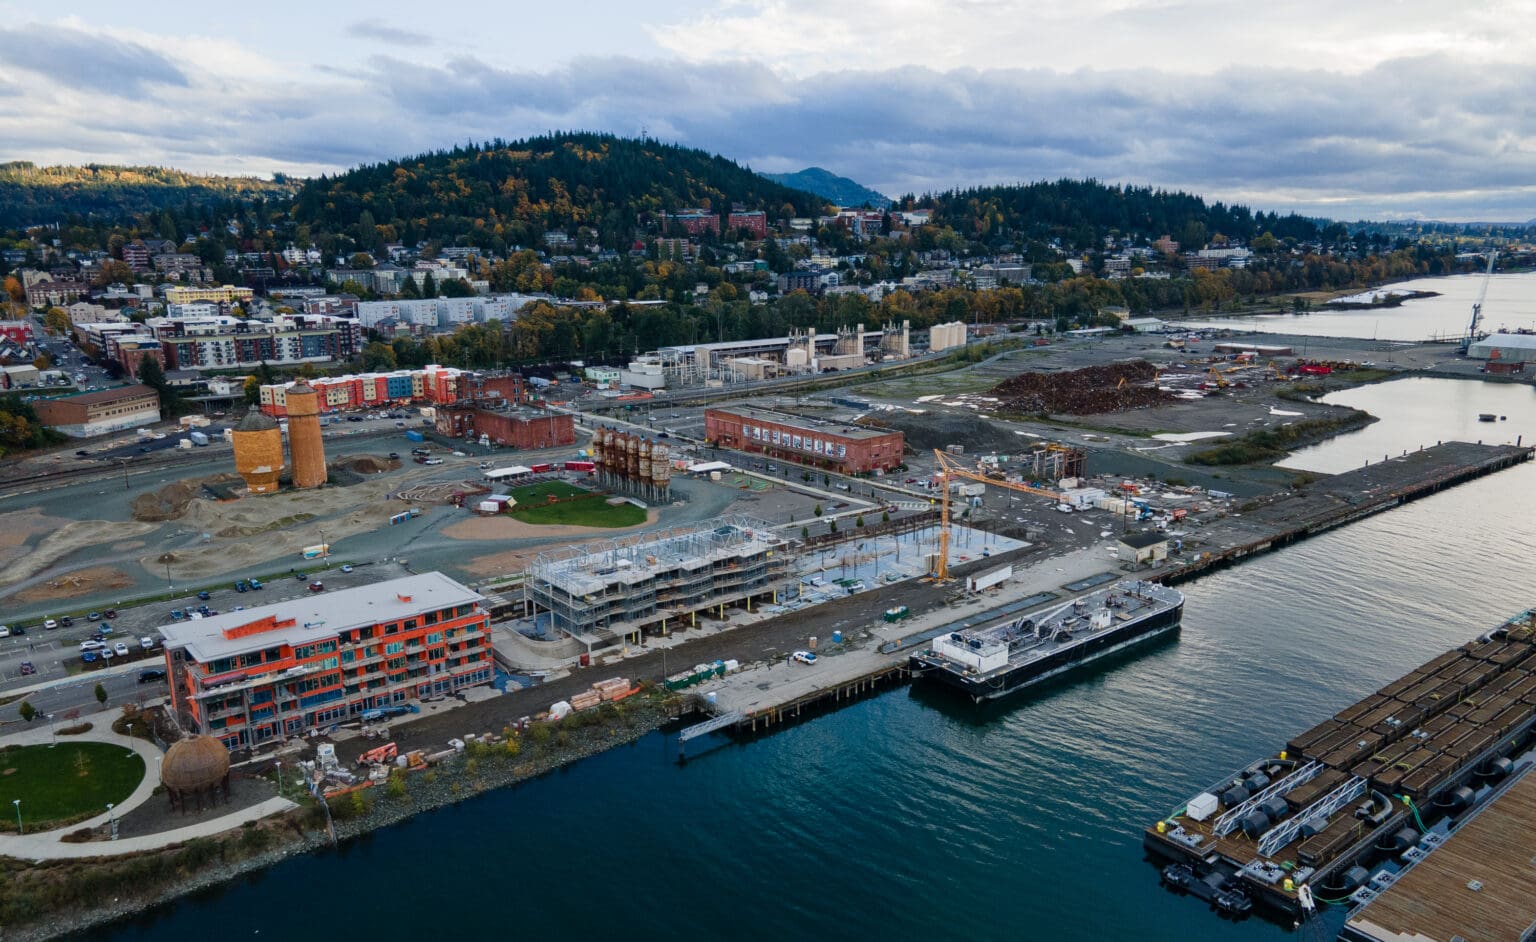 Future plans for Bellingham's waterfront grew more uncertain after Harcourt Developments missed a deadline to finish two condominium buildings along Whatcom Waterway